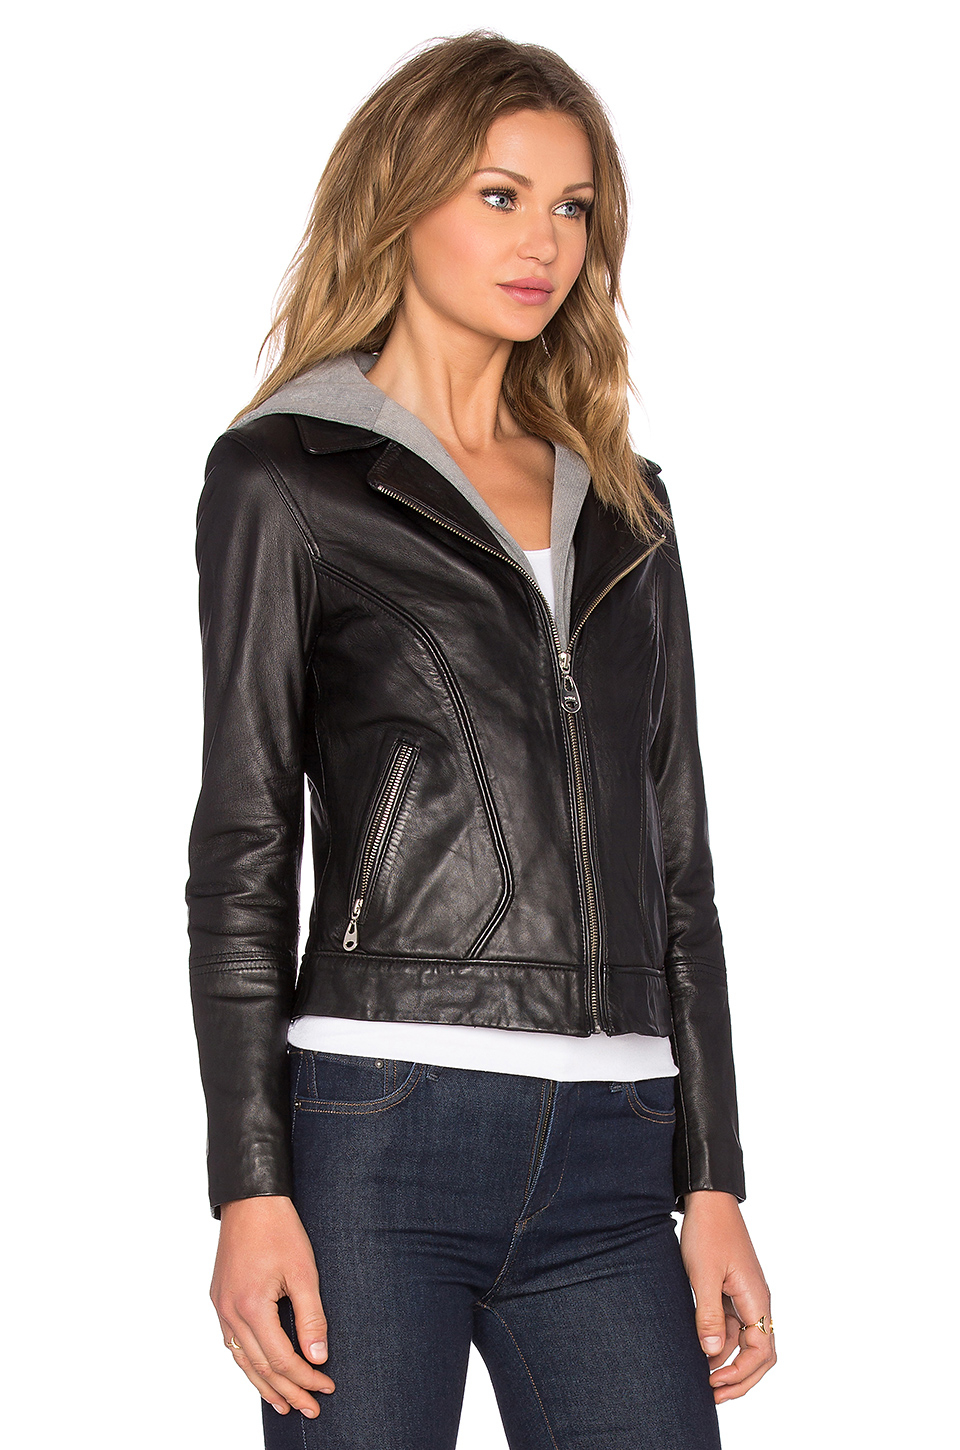 Lyst Doma Leather  Black Hooded Leather Jacket  in Black